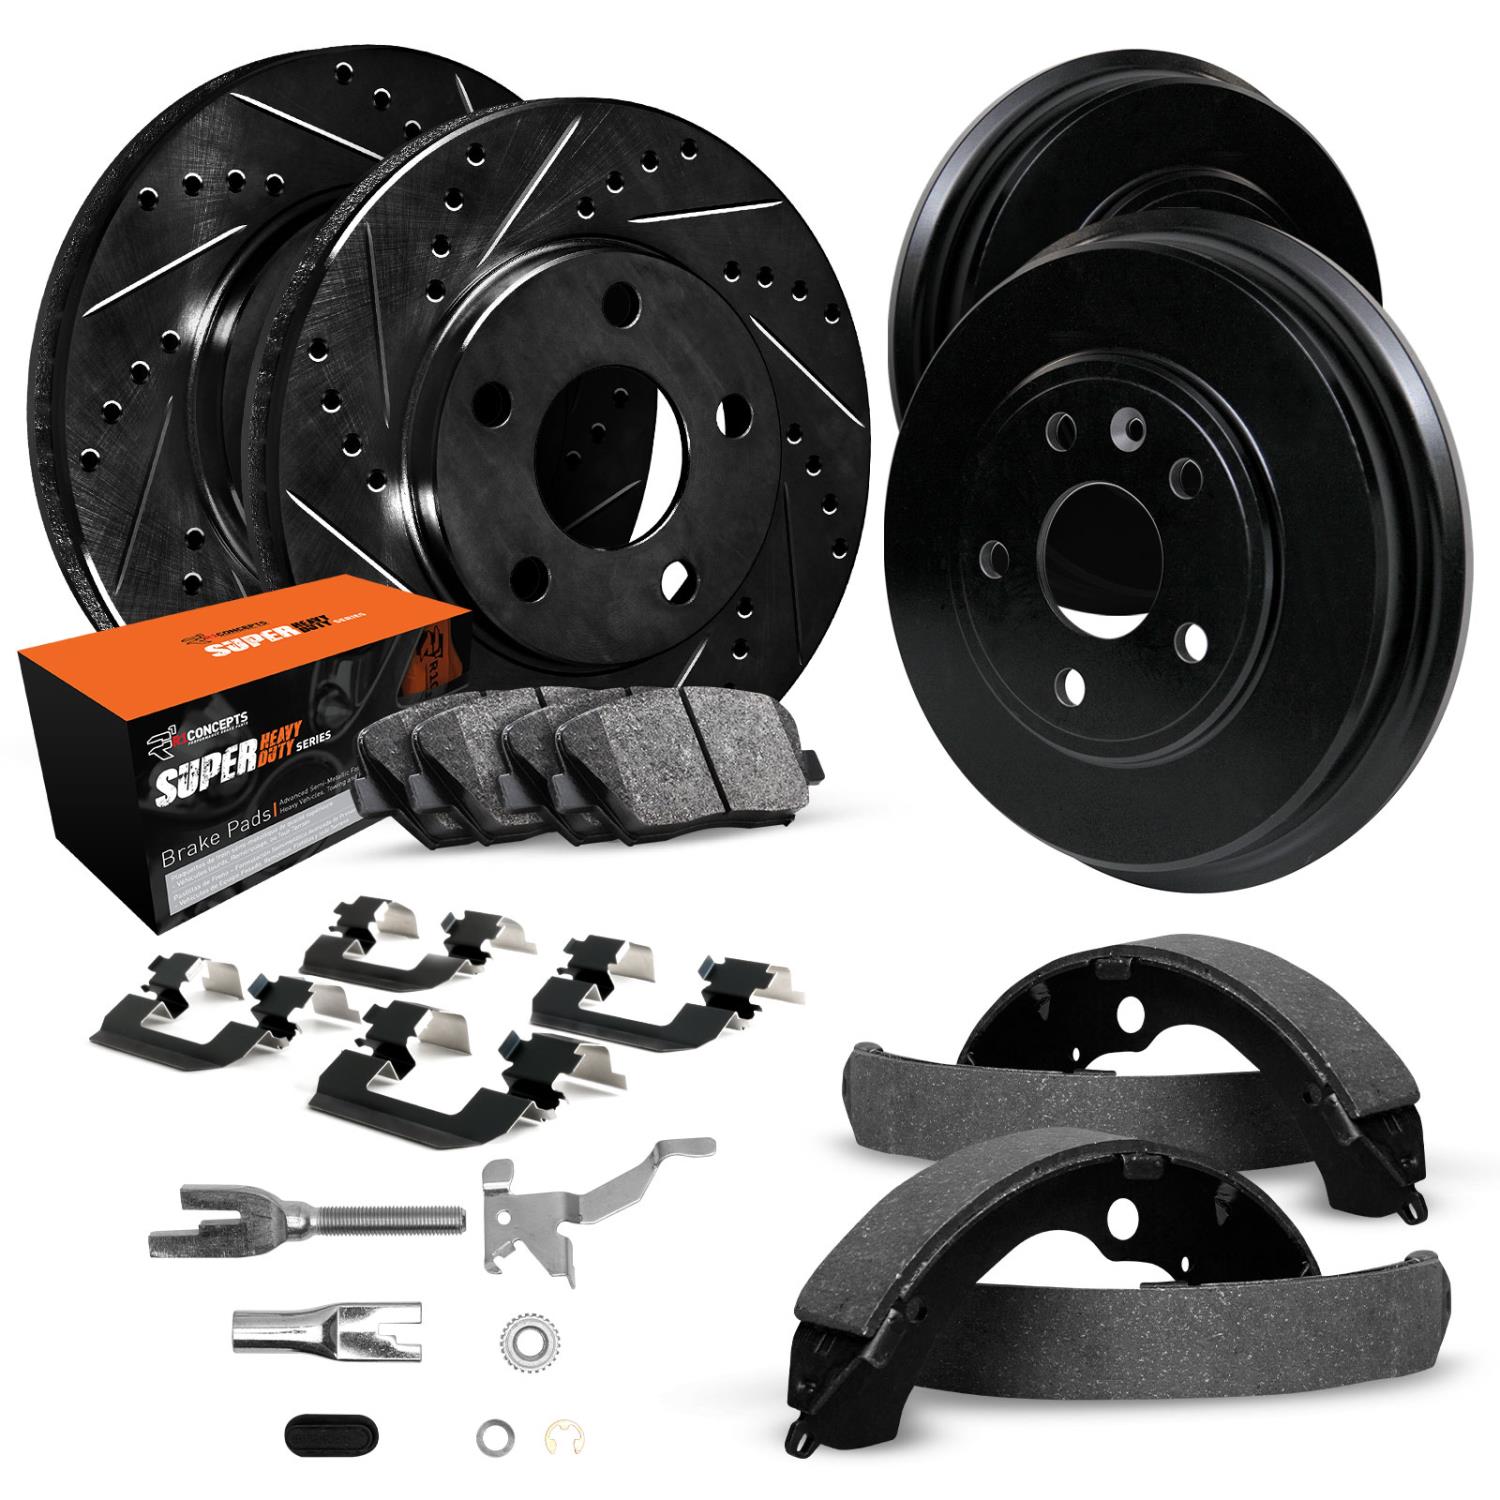 E-Line Slotted Black Brake Rotor & Drum Set w/Super-Duty Pads, Shoes, Hardware/Adjusters, 1975-1979 Ford/Lincoln/Mercury/Mazda